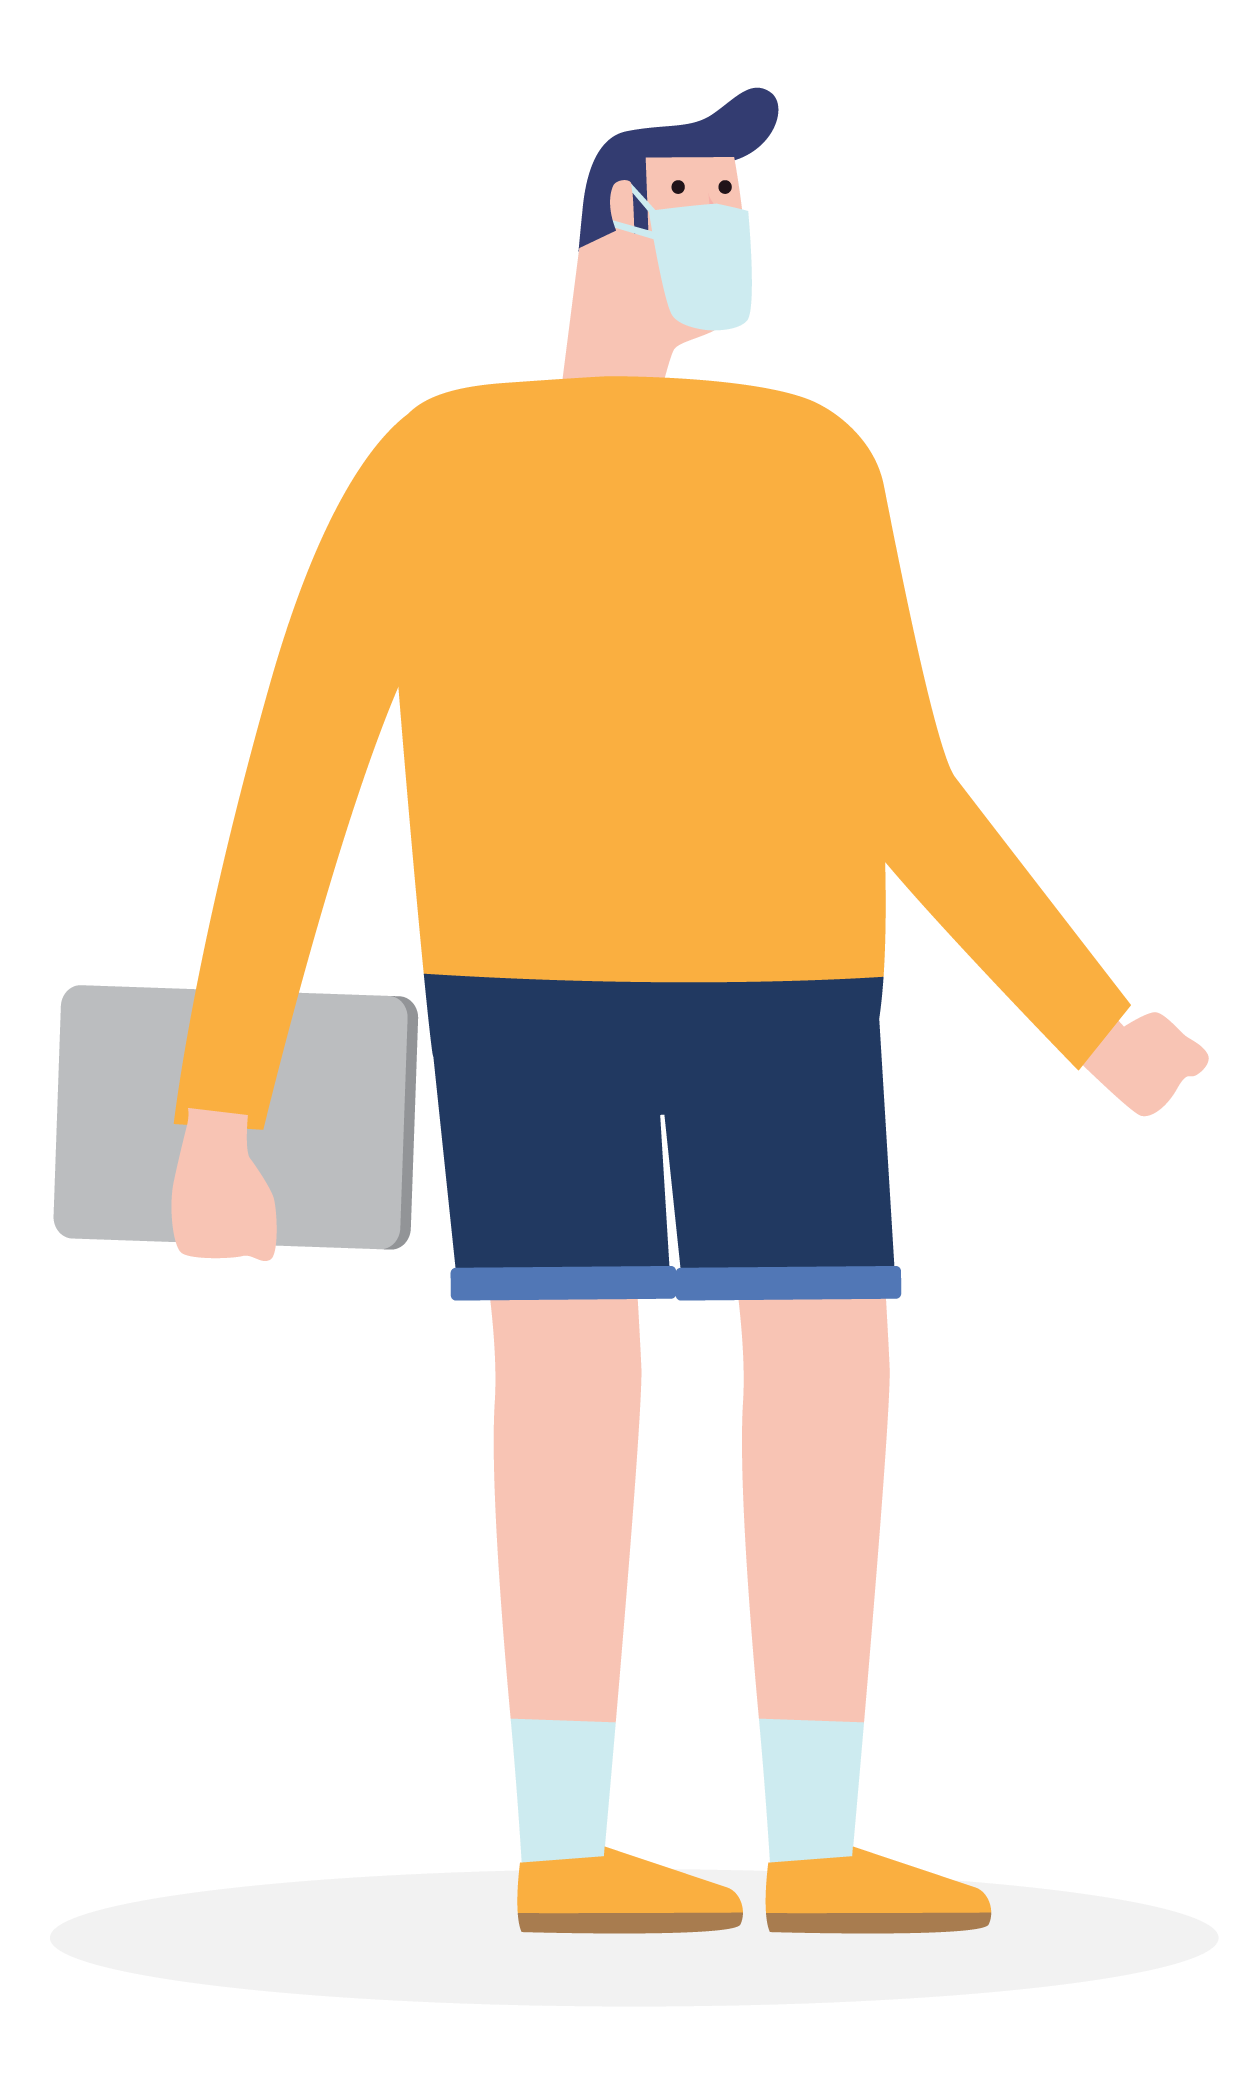 A male illustration carrying a laptop wearing a mask.